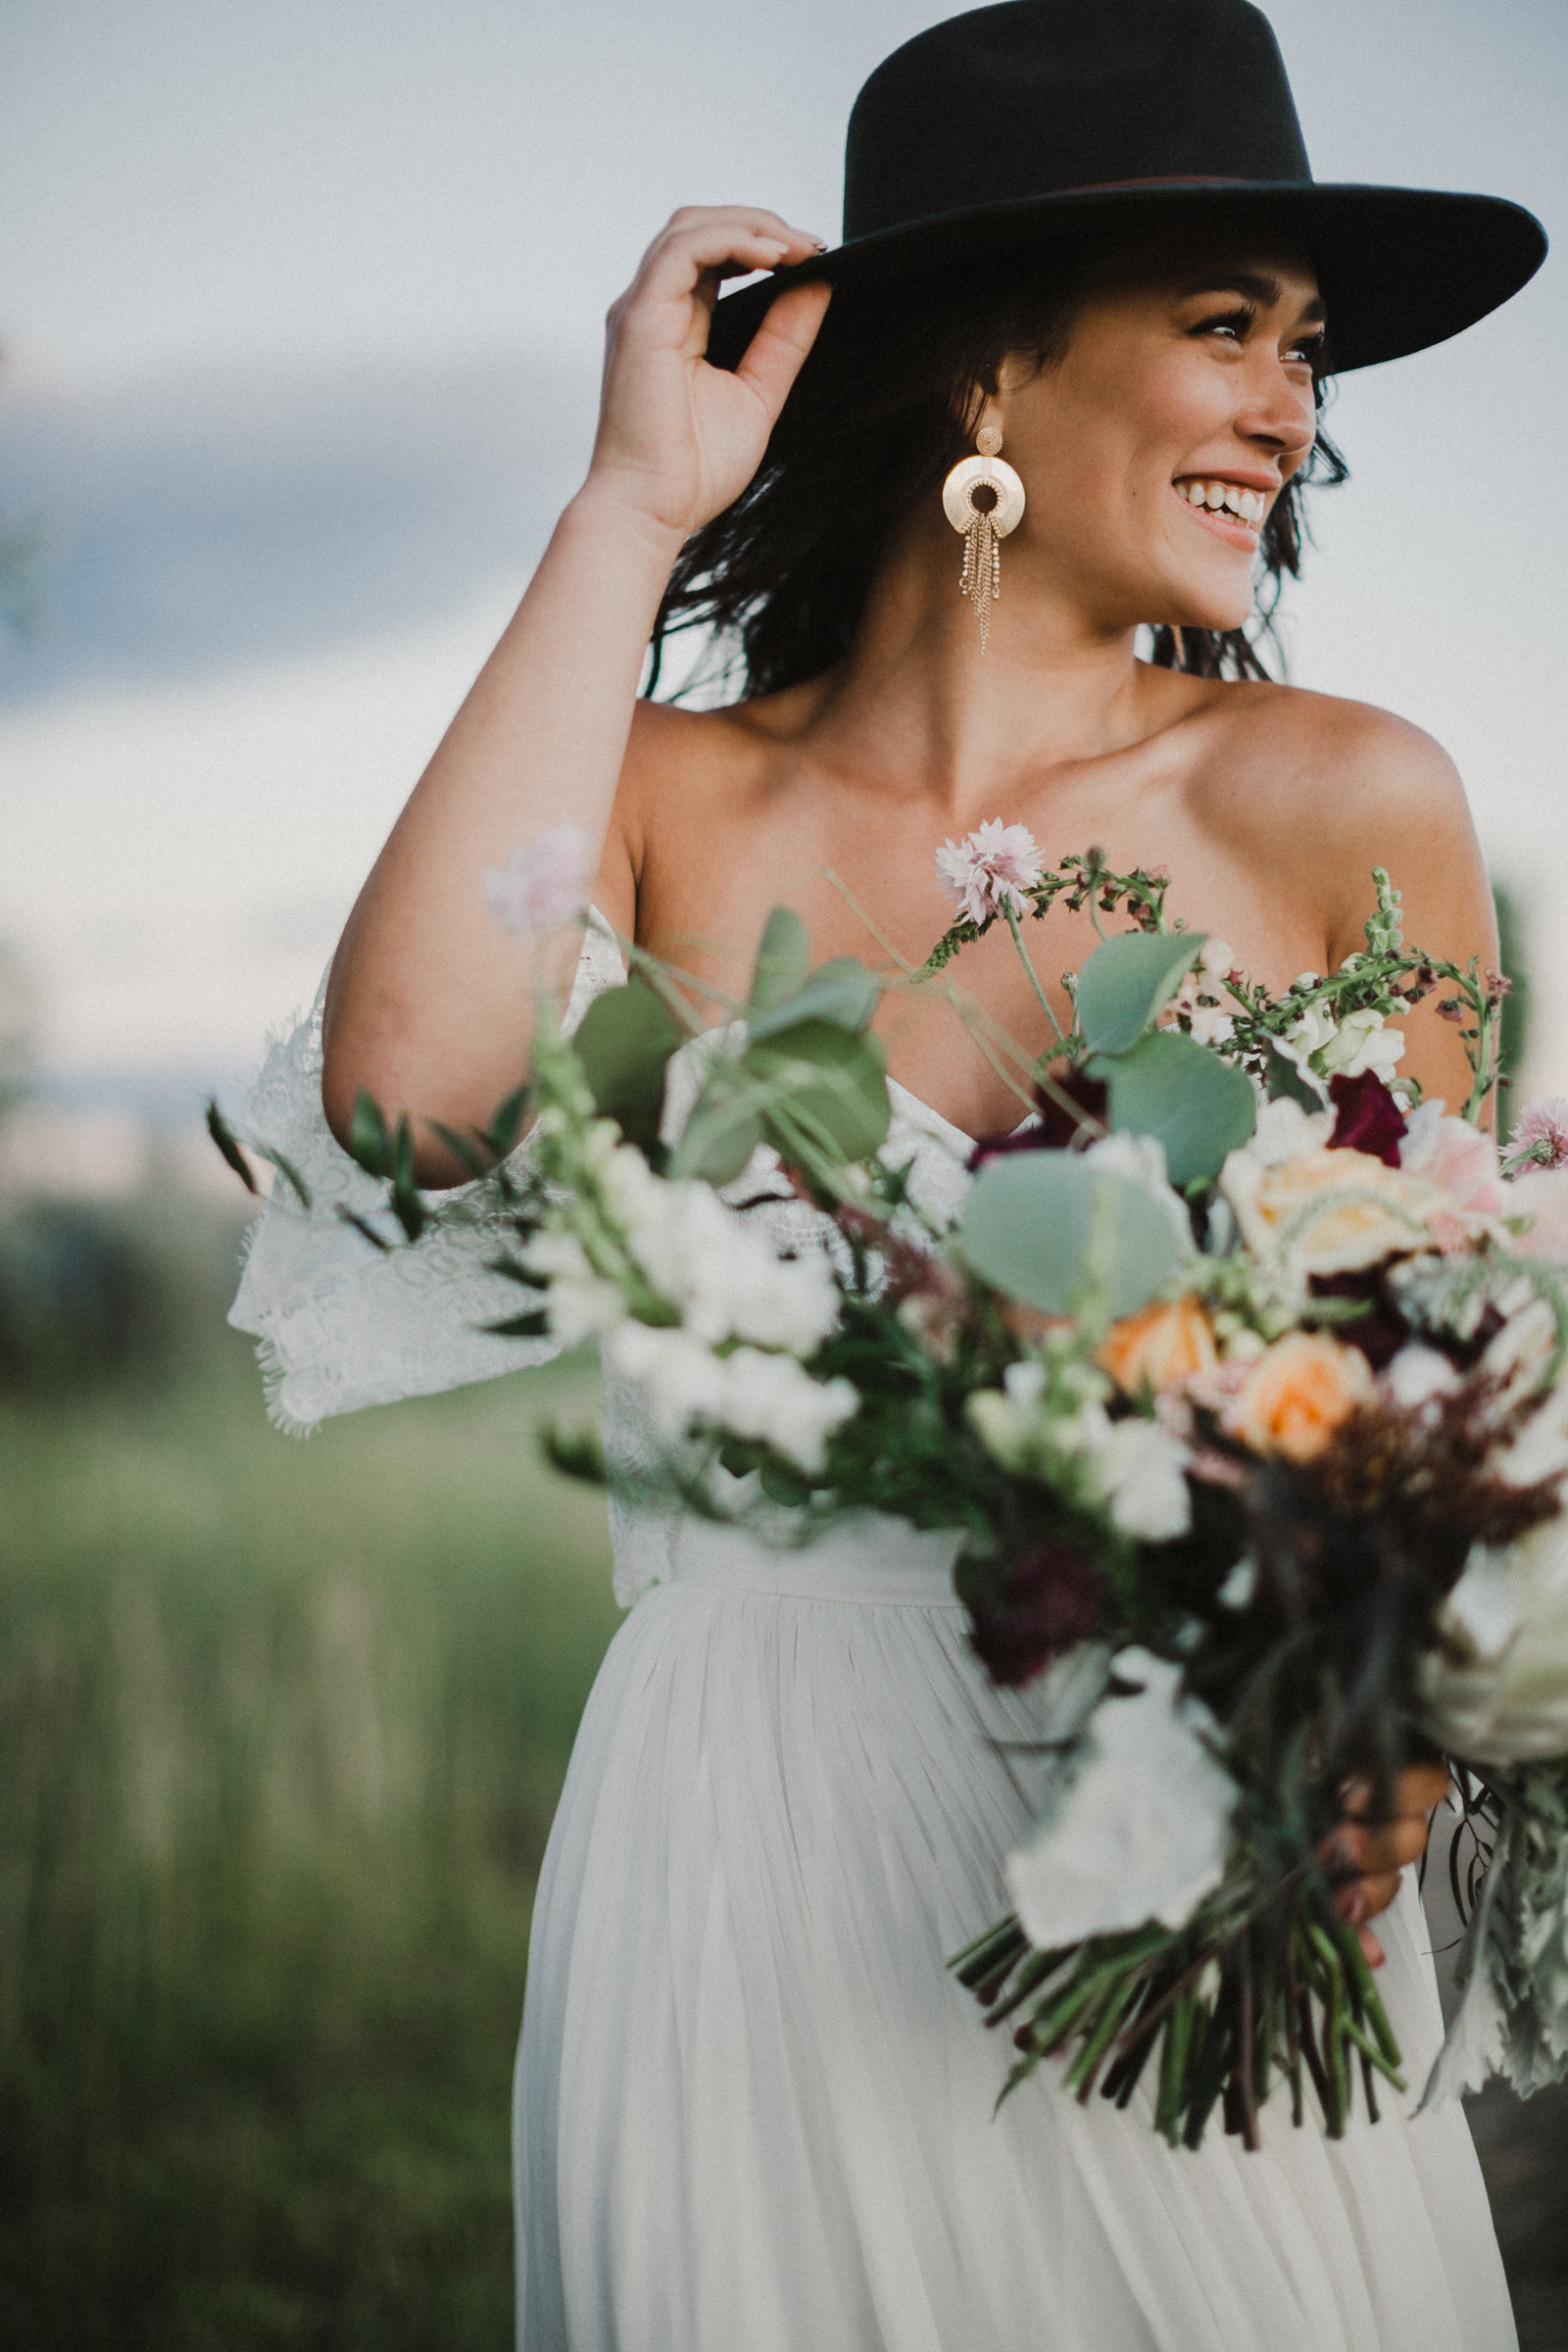 Indie styled wedding shoot in collaboration with Montana's Velvet Bride bridal boutique.